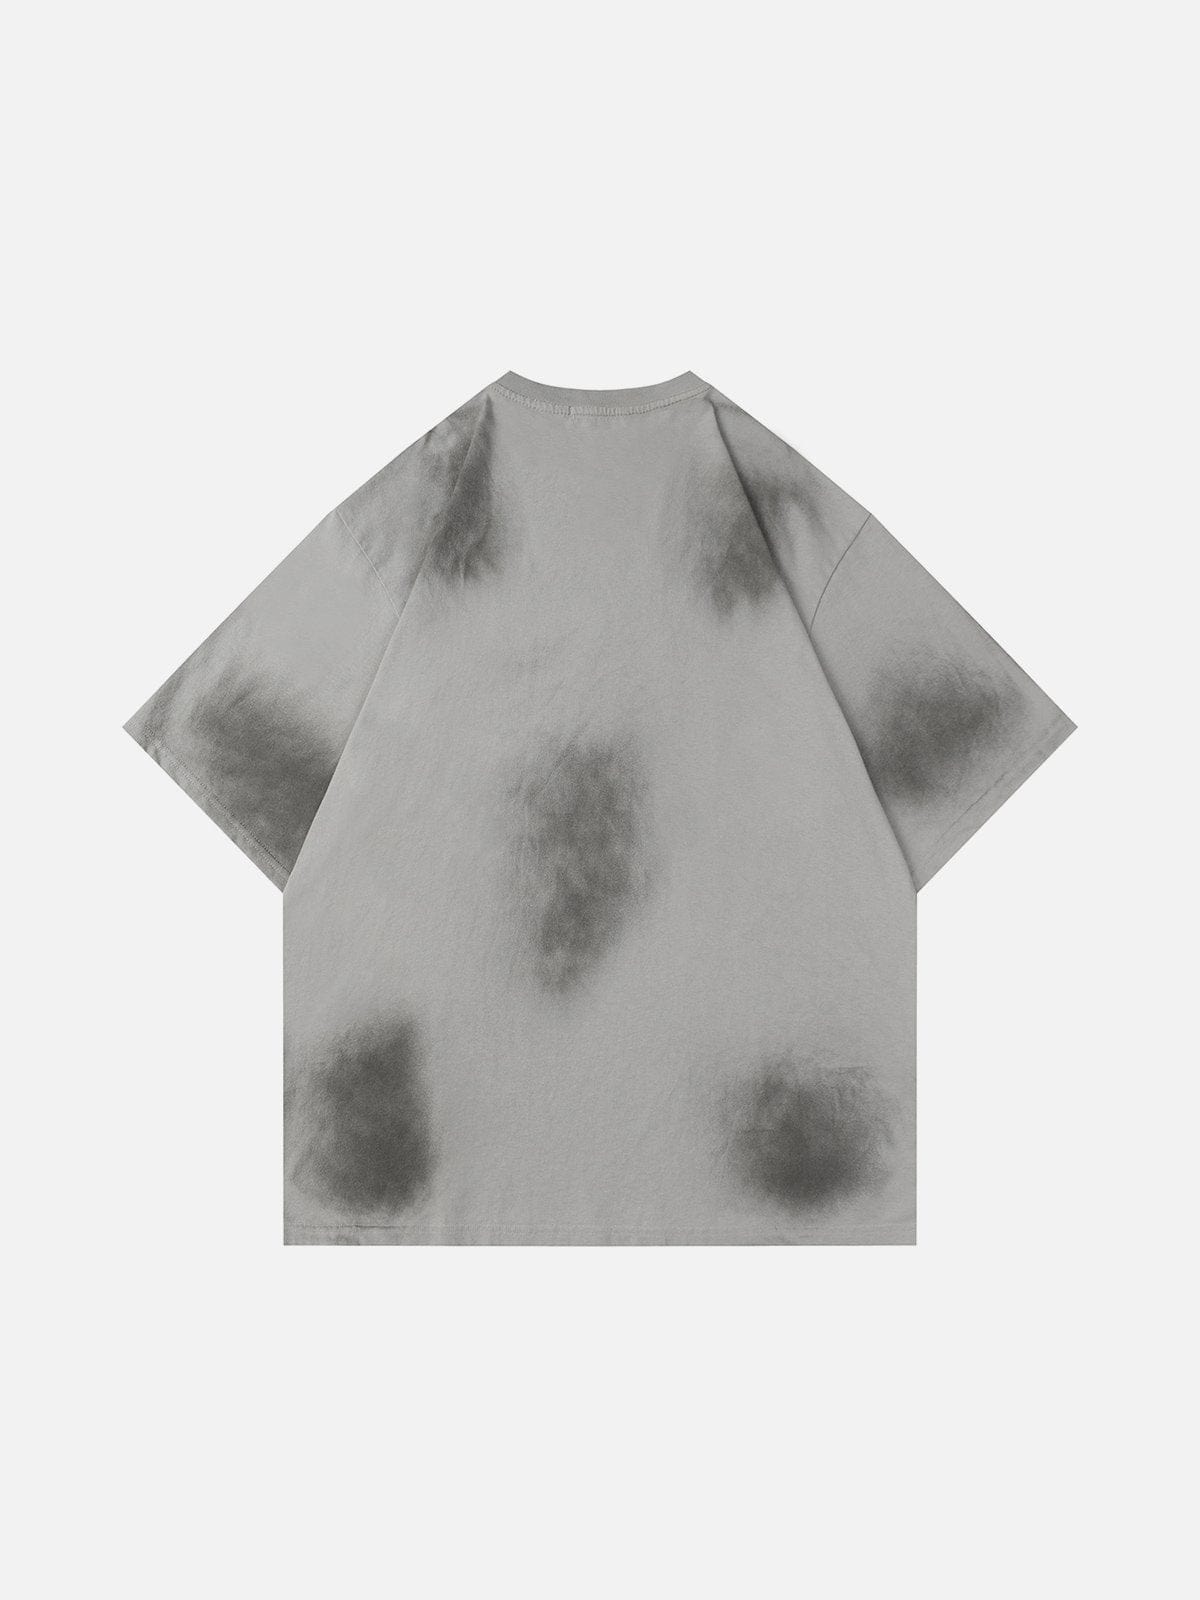 NEV Tie-Dye Embroidery Patch Tee